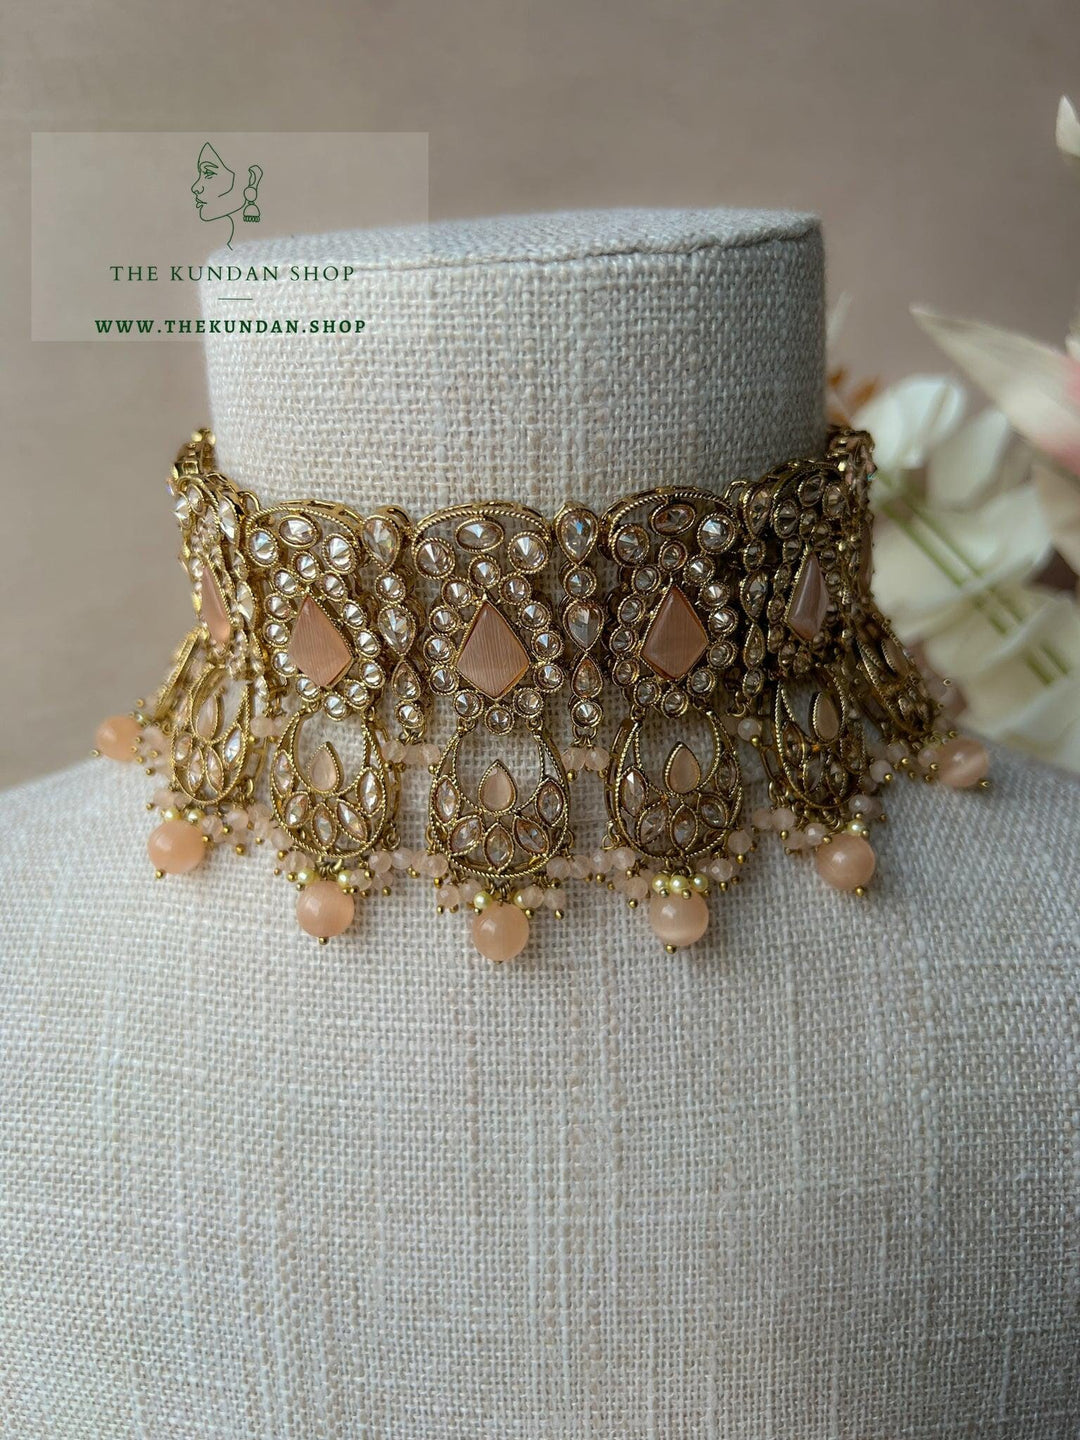 Promising Polki in Peach Necklace Sets THE KUNDAN SHOP 